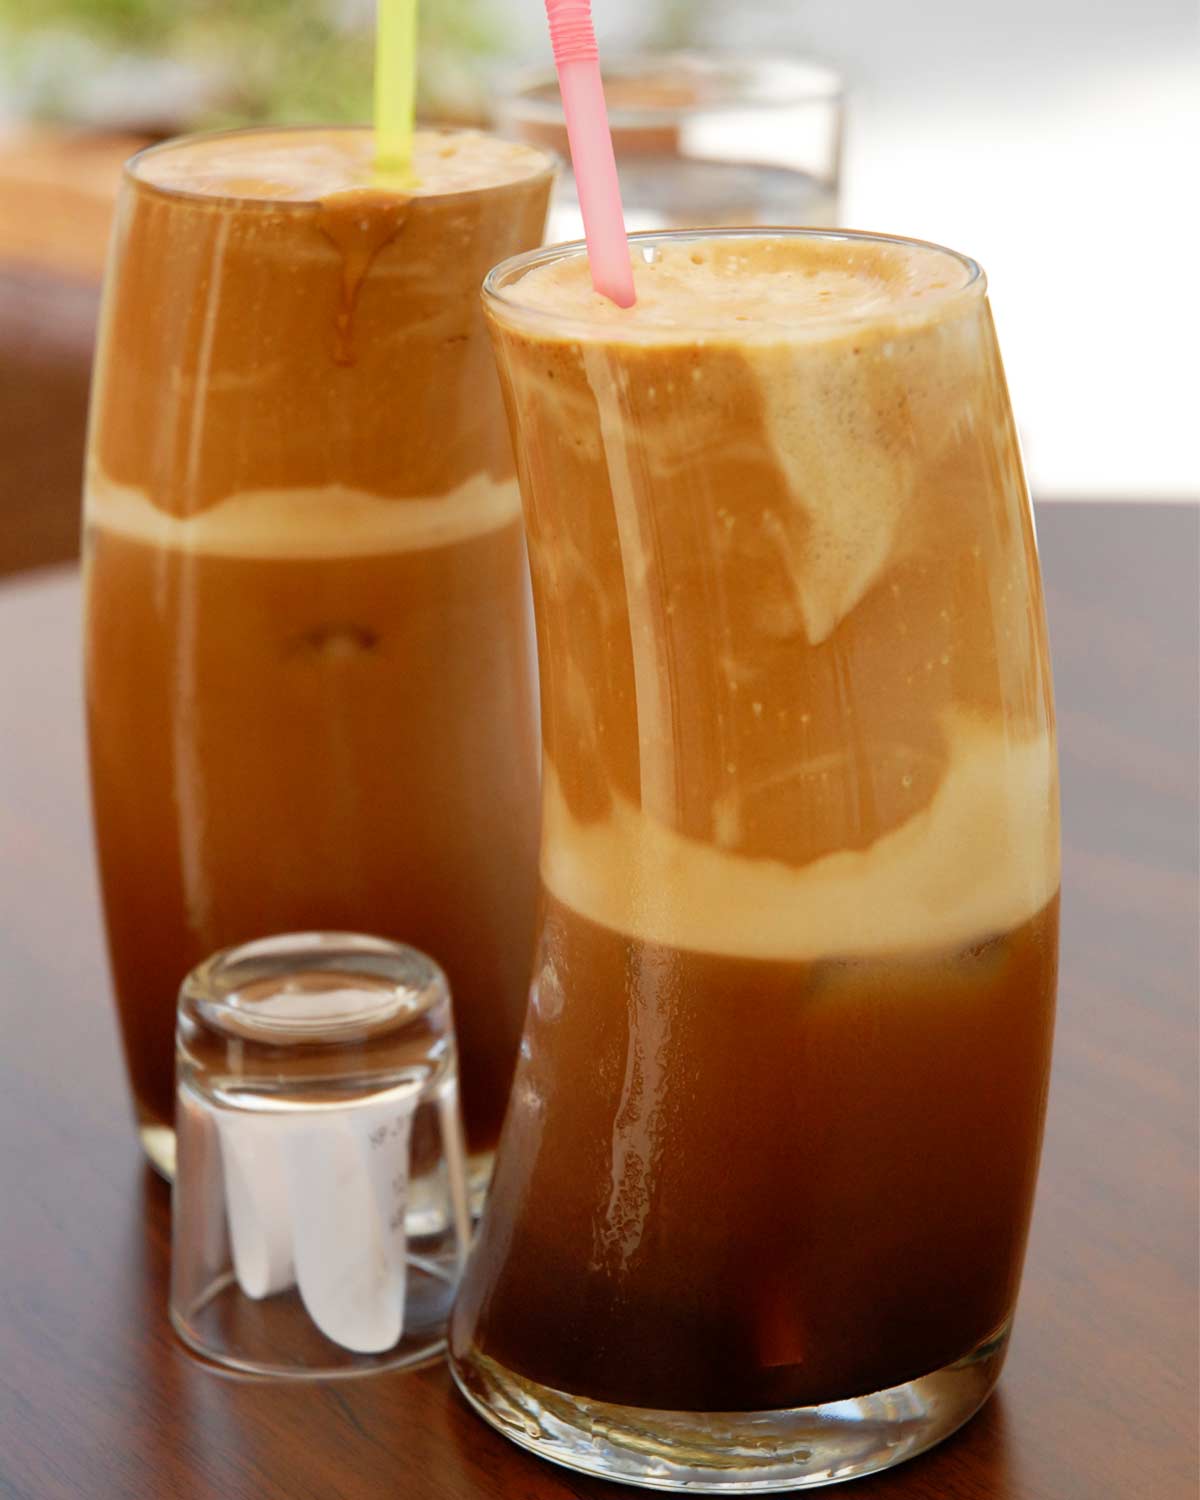 Two tall glasses filled with Greek-style frappe, with colorful straws standing up in them.